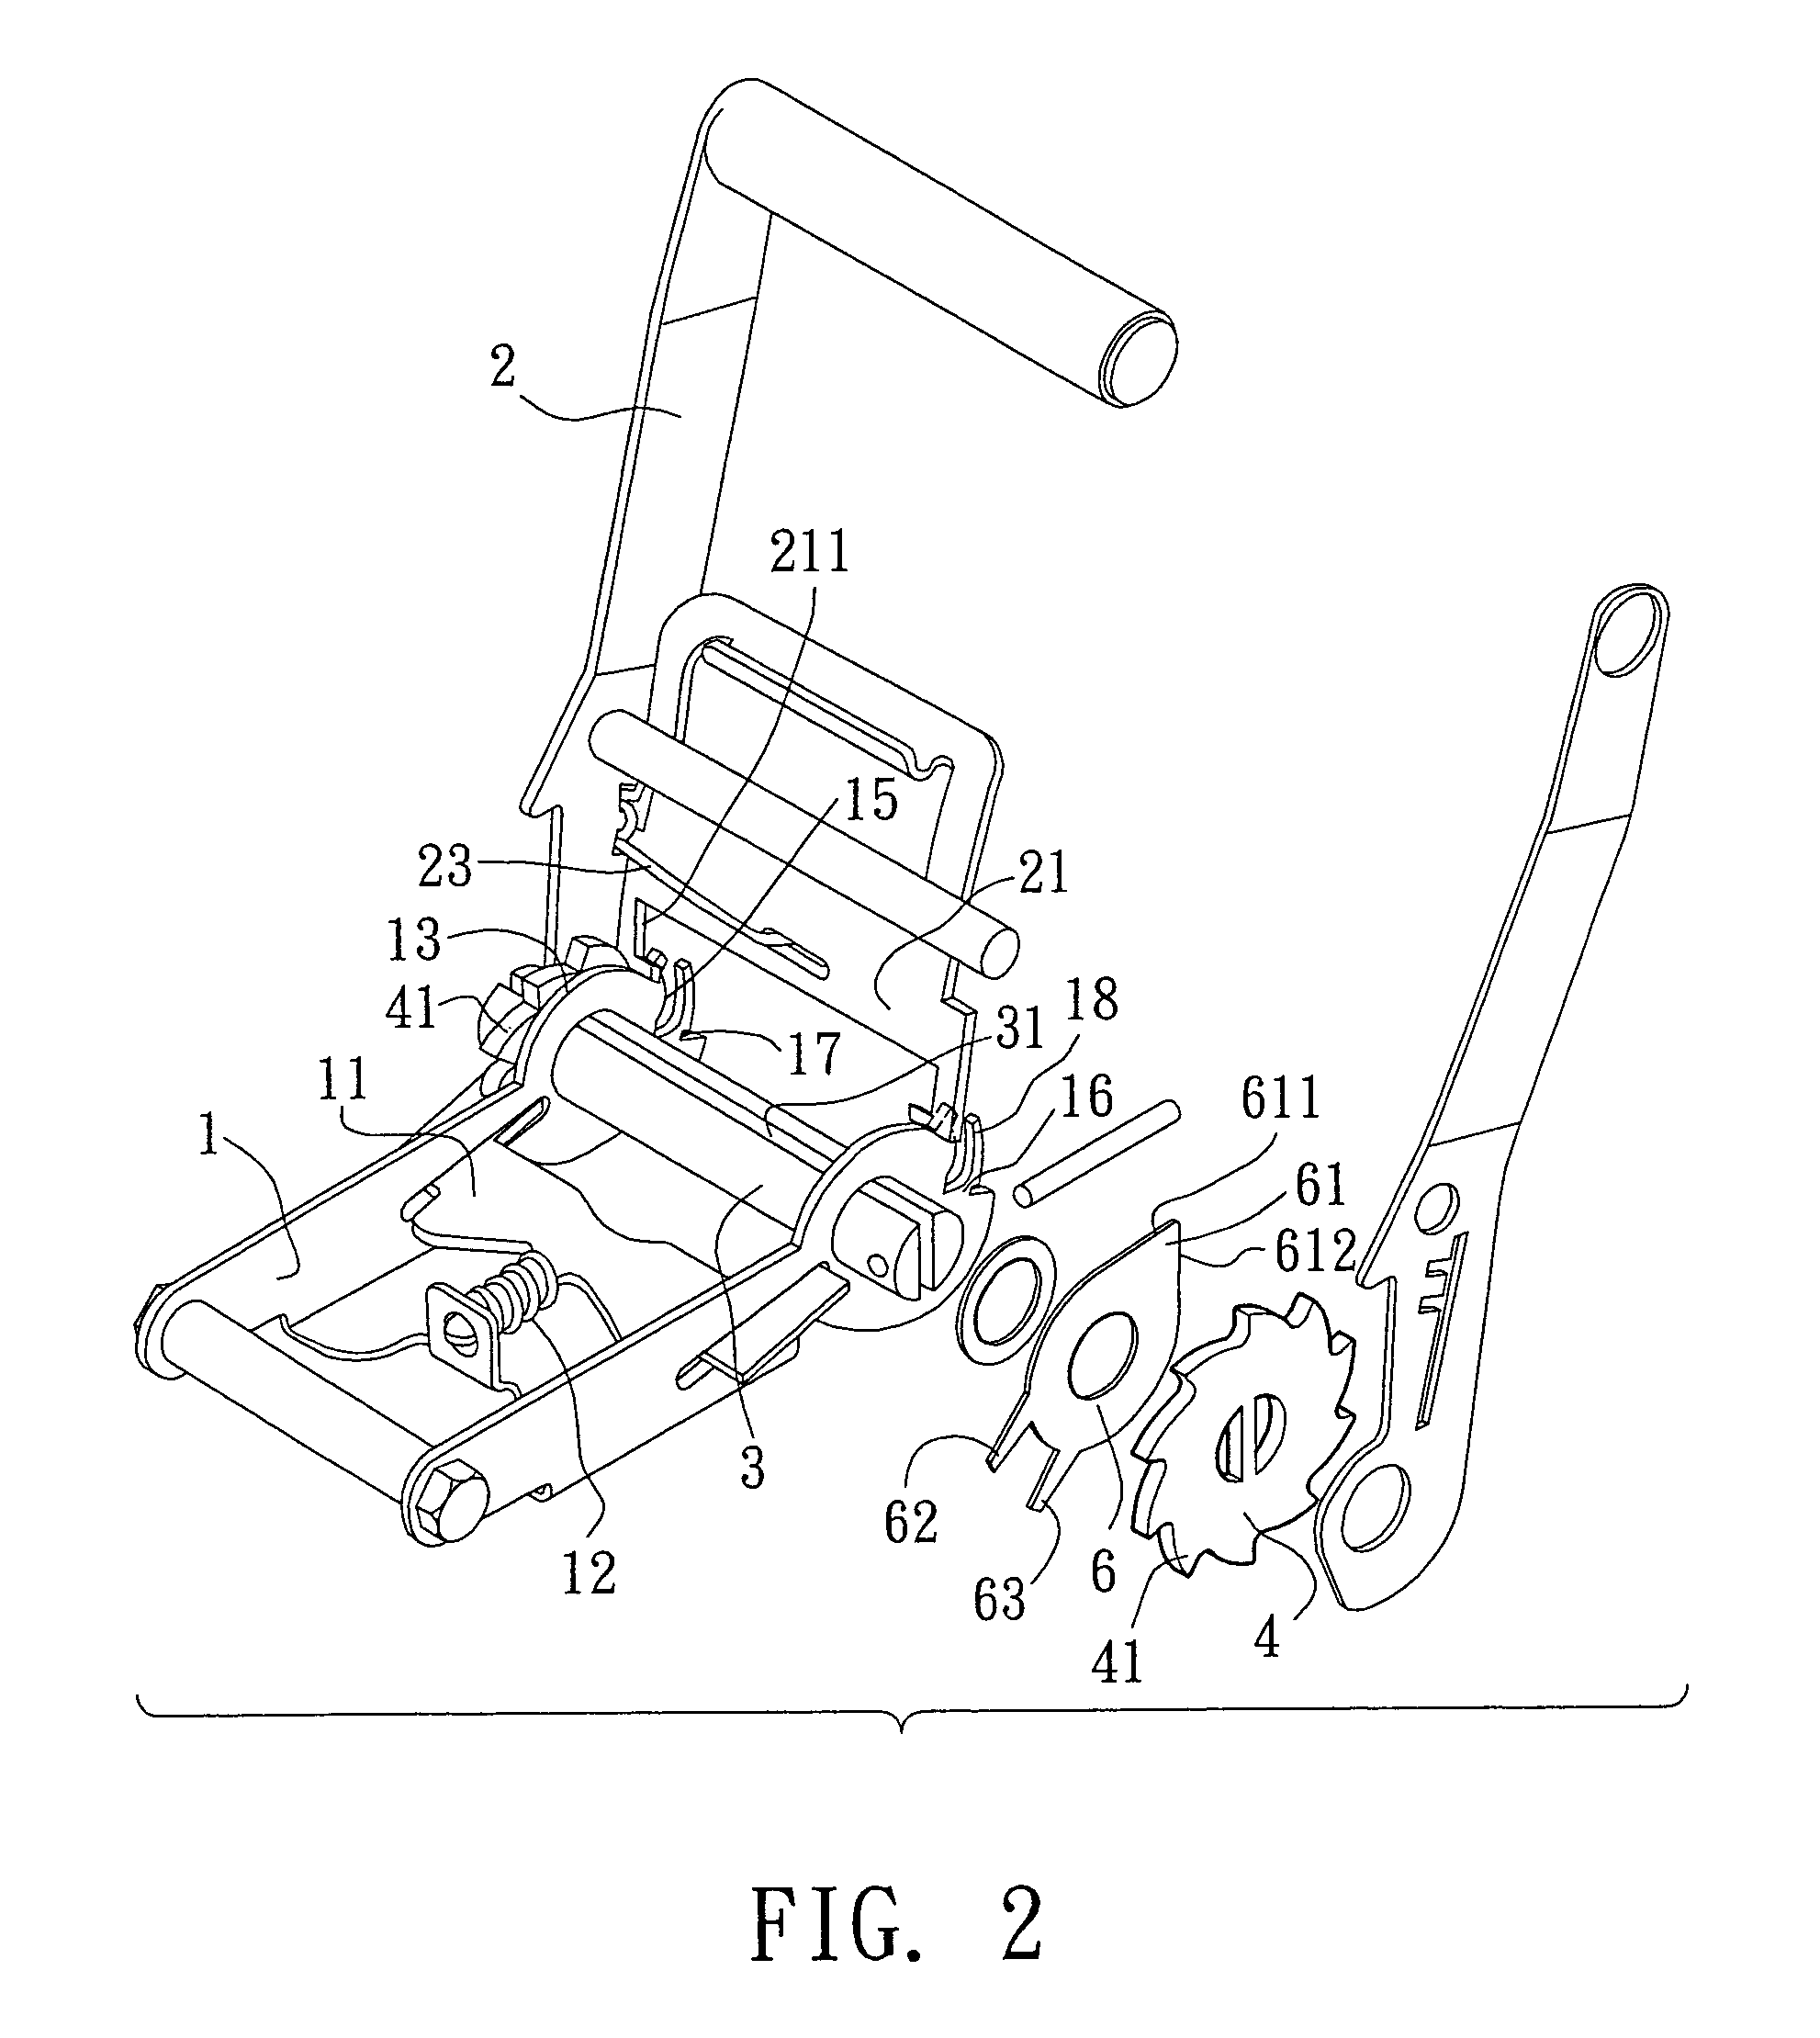 Belt reel assembly for fastening goods on a truck